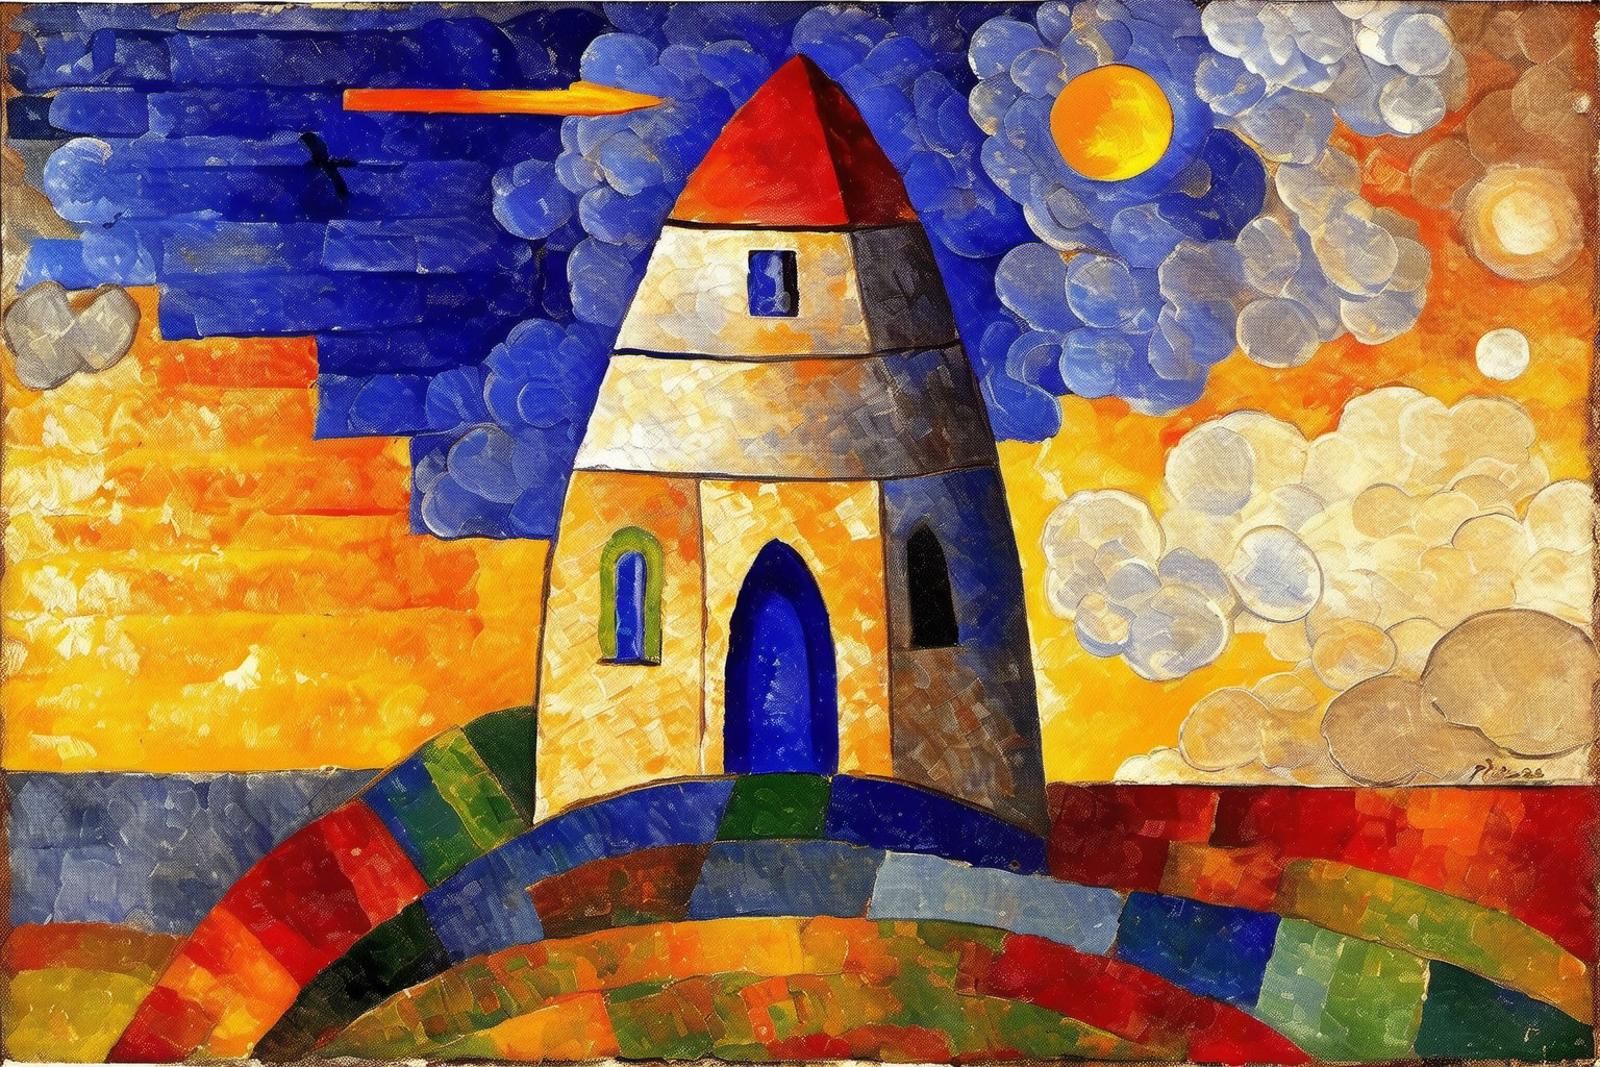 Colorful painting of a church with a blue door, a red roof, and a yellow sky.